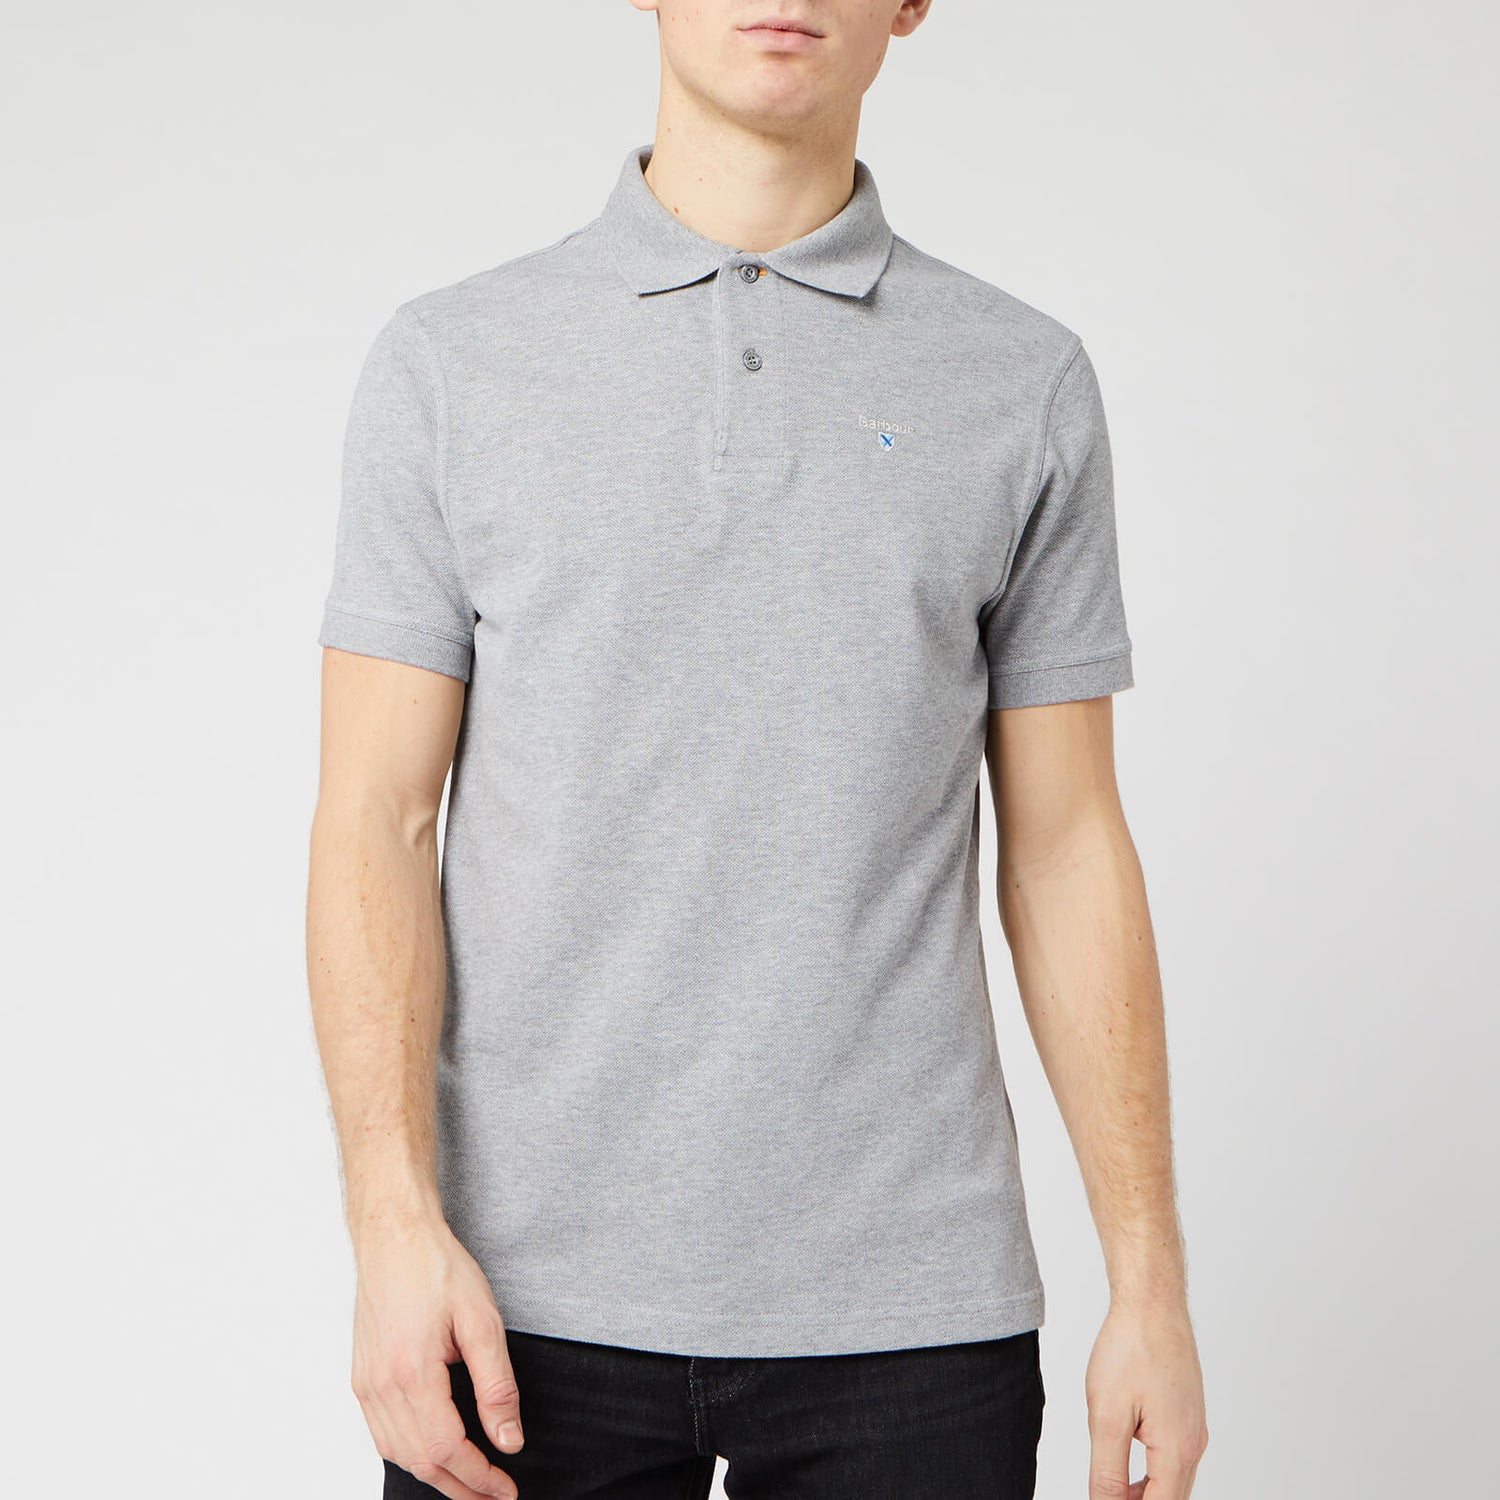 Barbour Heritage Men's Sports Polo - Grey Marl - S